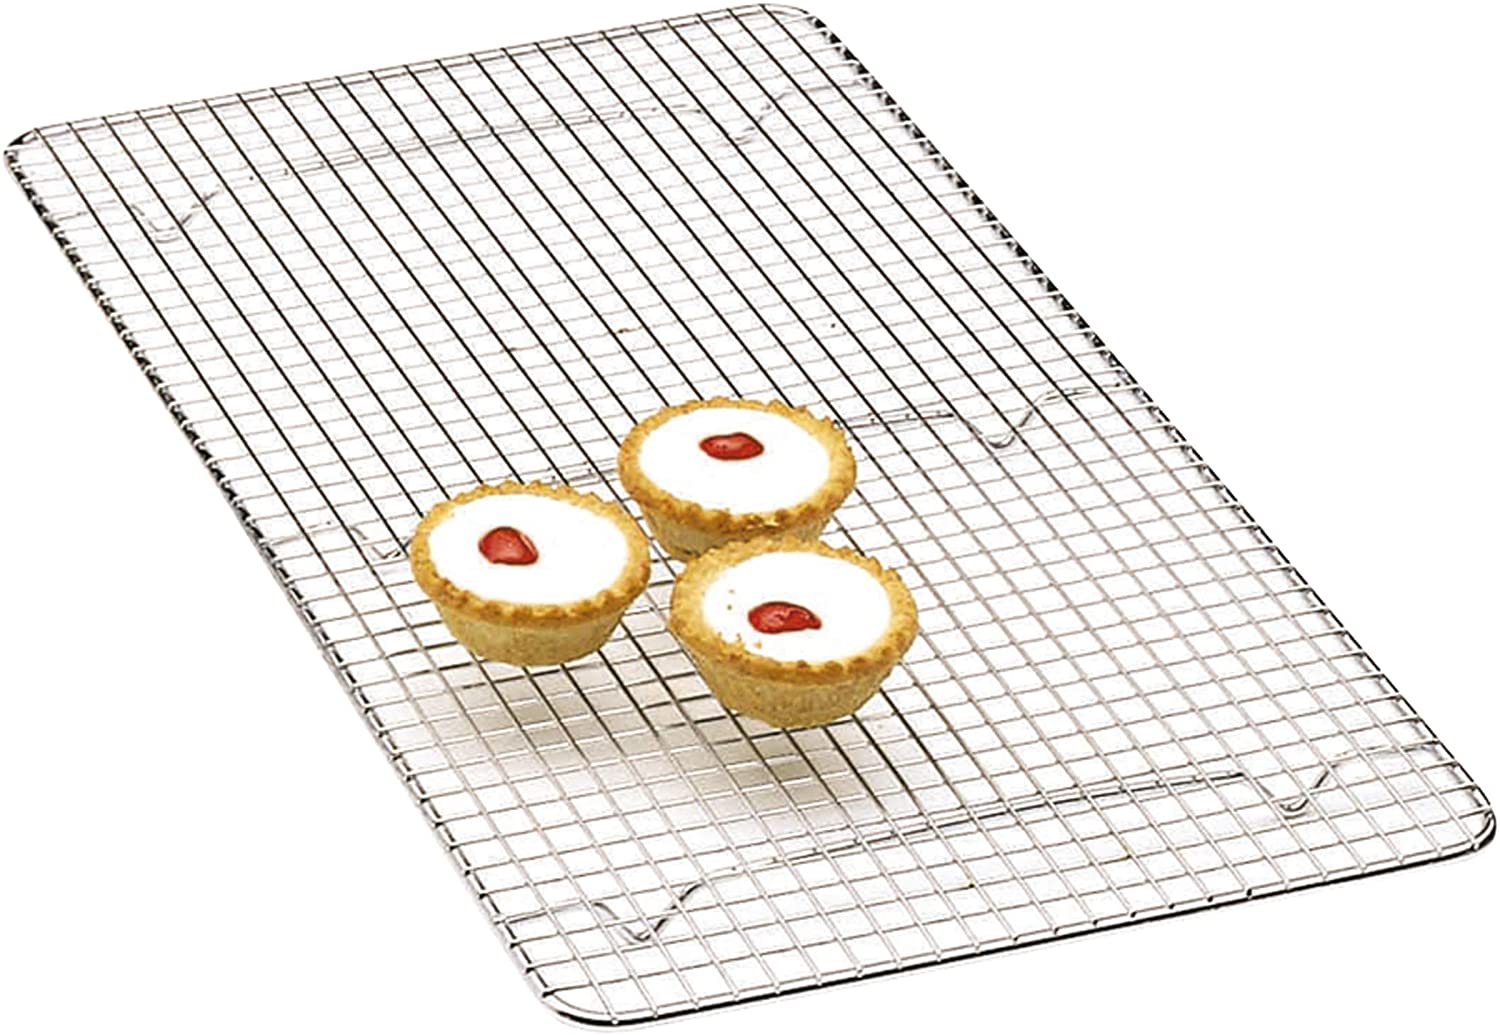 KitchenCraft Kitchen Craft Chrome Plated Deluxe Oblong Cake Cooling Tray 46cm x 25cm